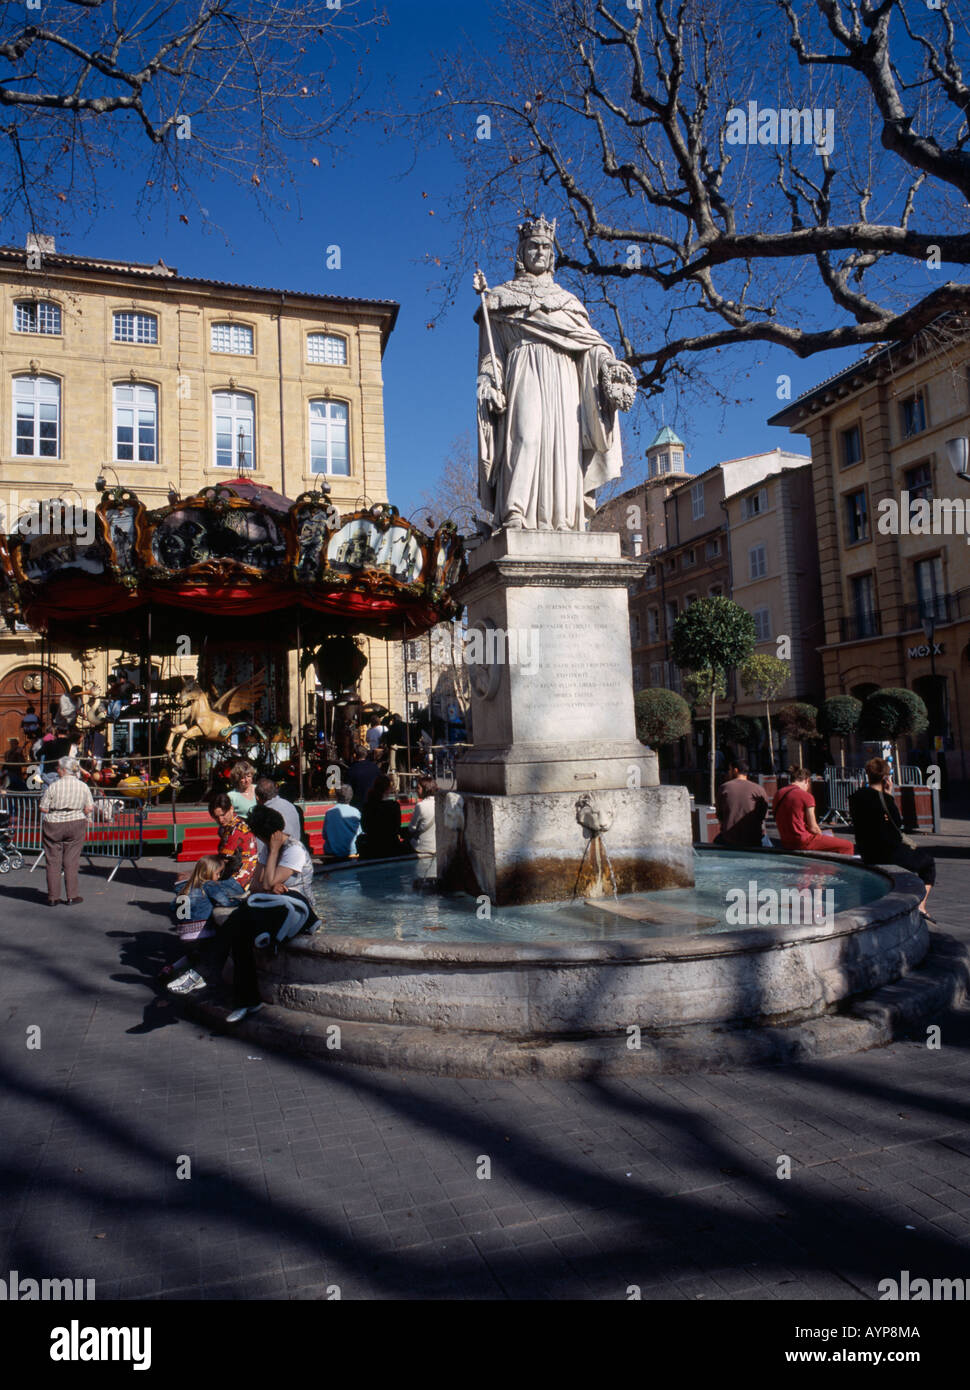 FRANCE Aix en Provence Statue of King René in Cours Mirabeau with people  sat on edge of fountain with Carousel ride behind Stock Photo - Alamy